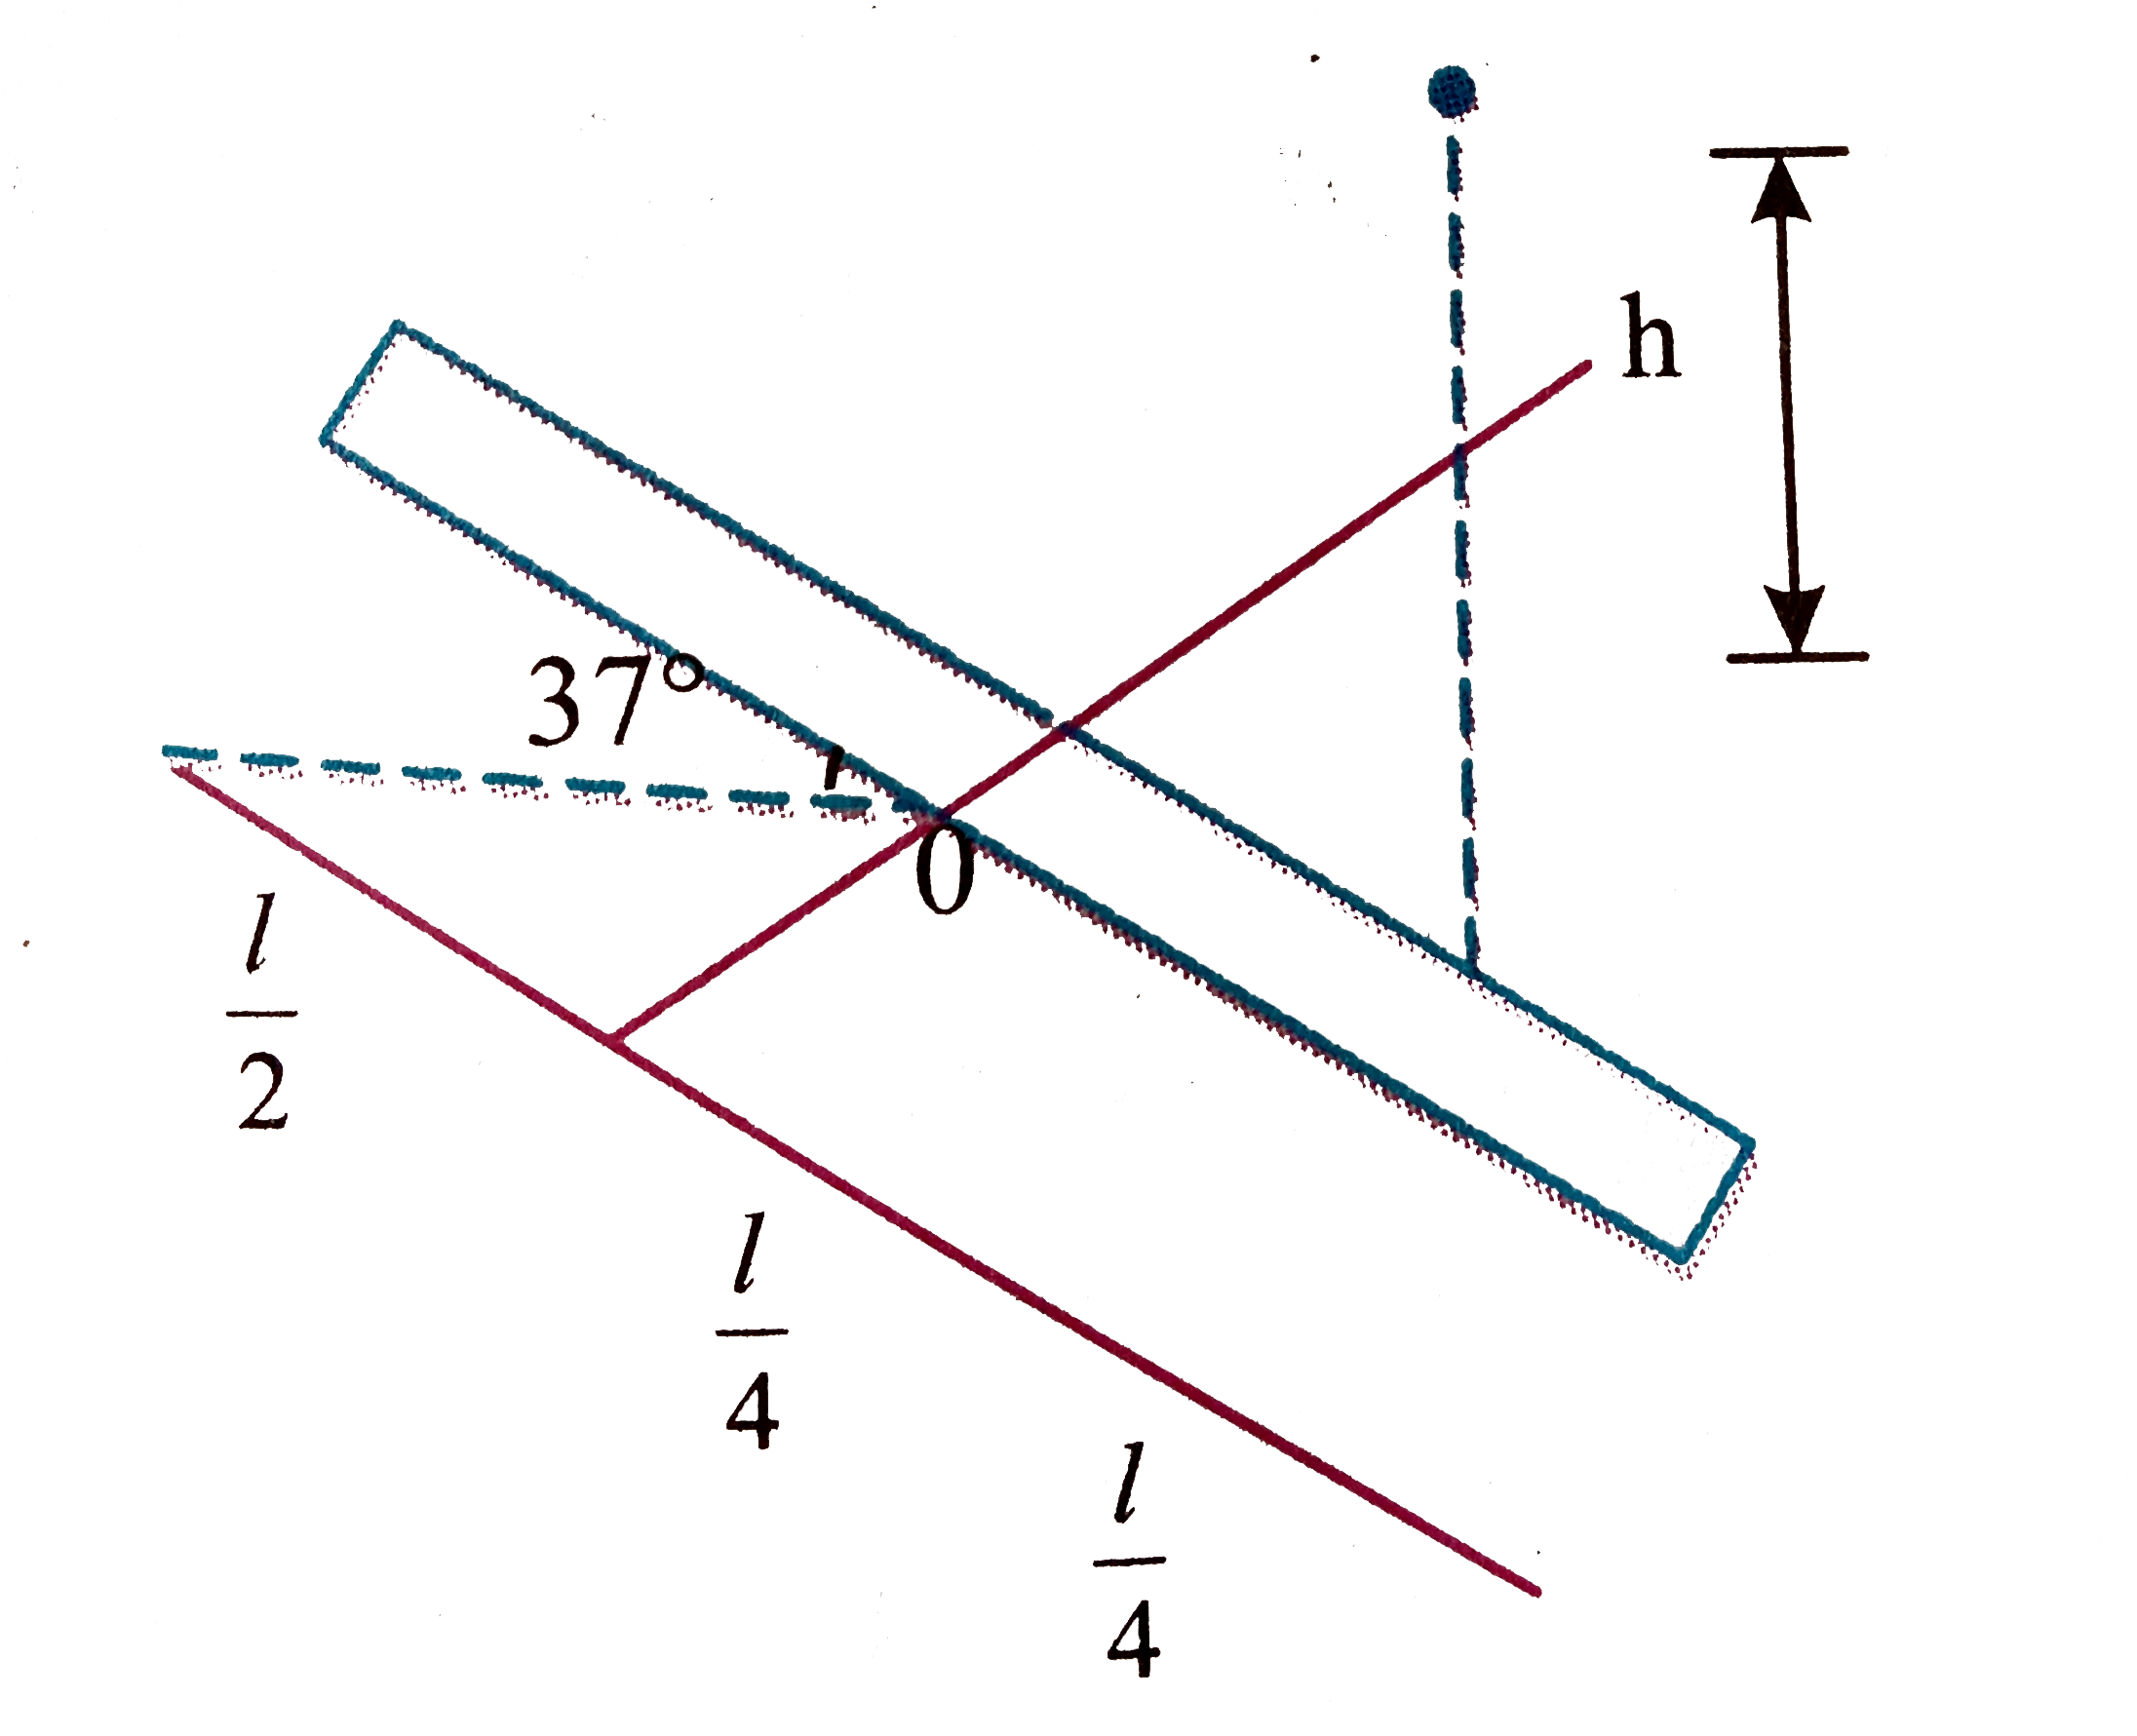 An uniform rod of mass m=30 kg and length l=0.80 m is free to rotate about a horizontal axis O passing through its centre. A particle P of mass M=11.2 kg falls vertically through a height h=36/245 m and collides elastically with the rod at a distance l/4 from O. at the instant of collision the rod was stationary and was at angle alpha=37^(@) with horizontal as shown in figure      Velocity of particle P after collision (g=10ms^(-2))